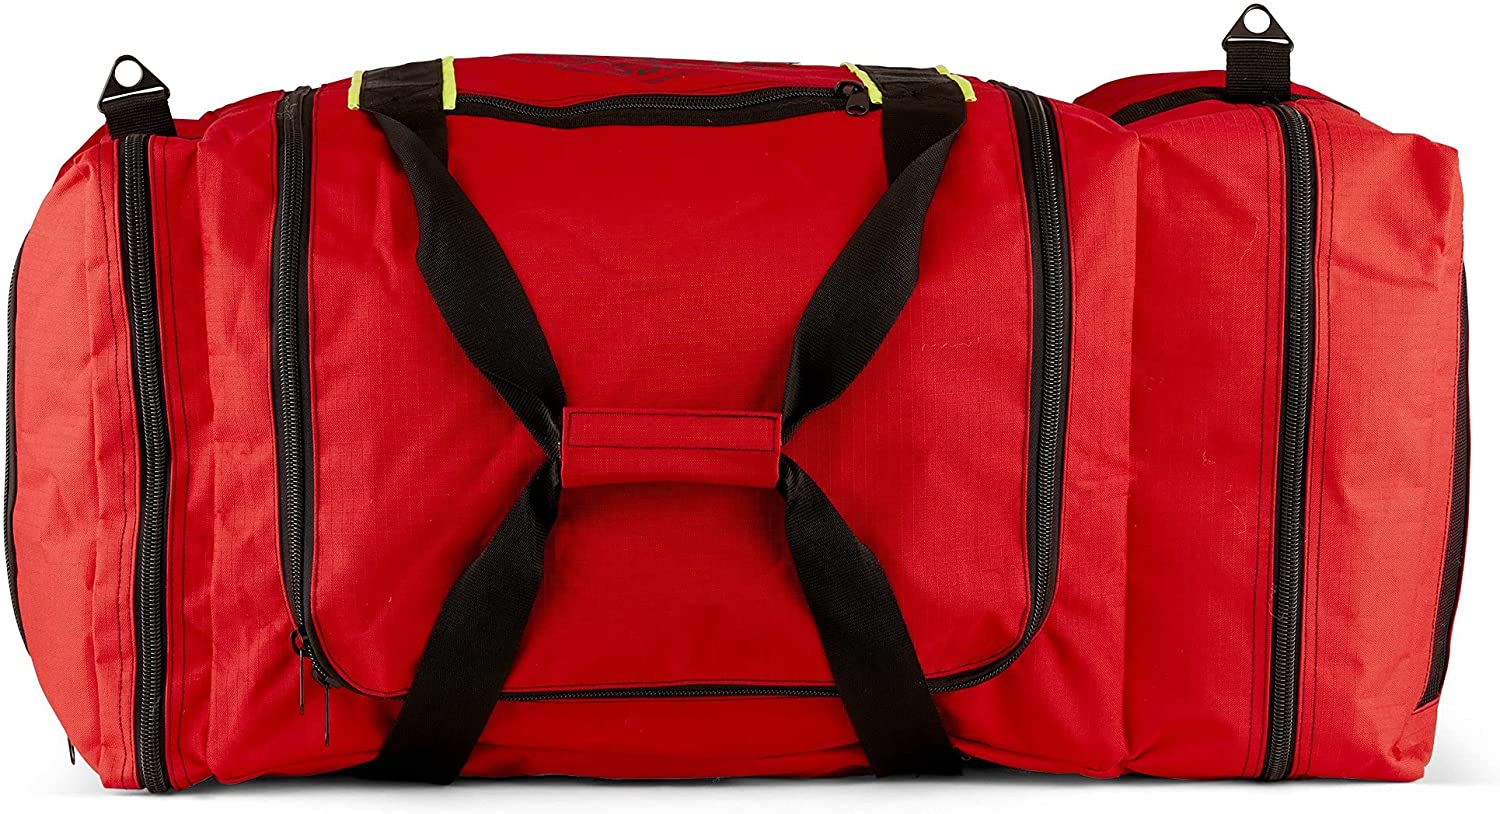 Firefighter Turnout Gear and Safety Duffel Bag for Fire Large Fall Protection